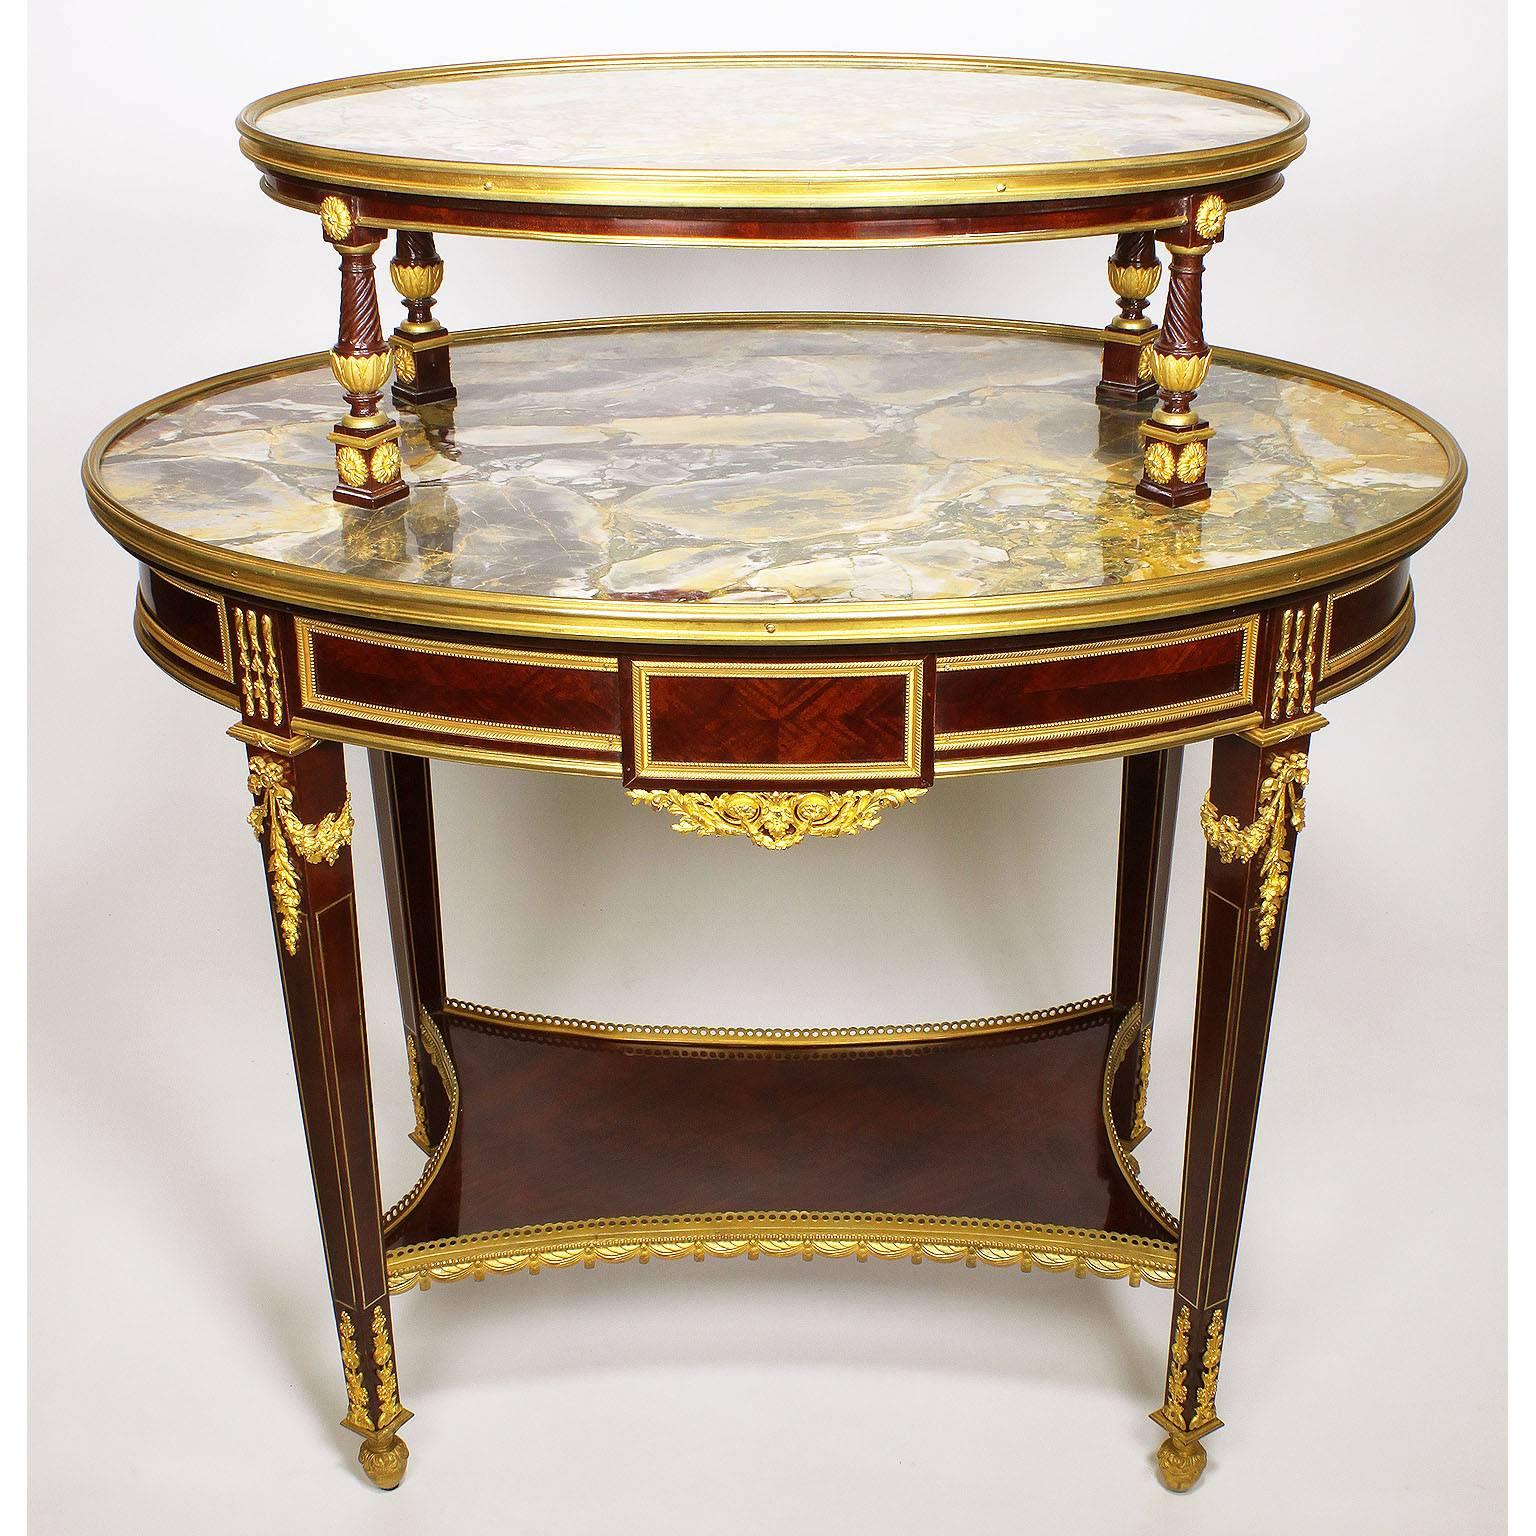 Gilt French 19th Century Louis XVI Style Ormolu-Mounted Mahogany Two-Tier Tea-Table For Sale